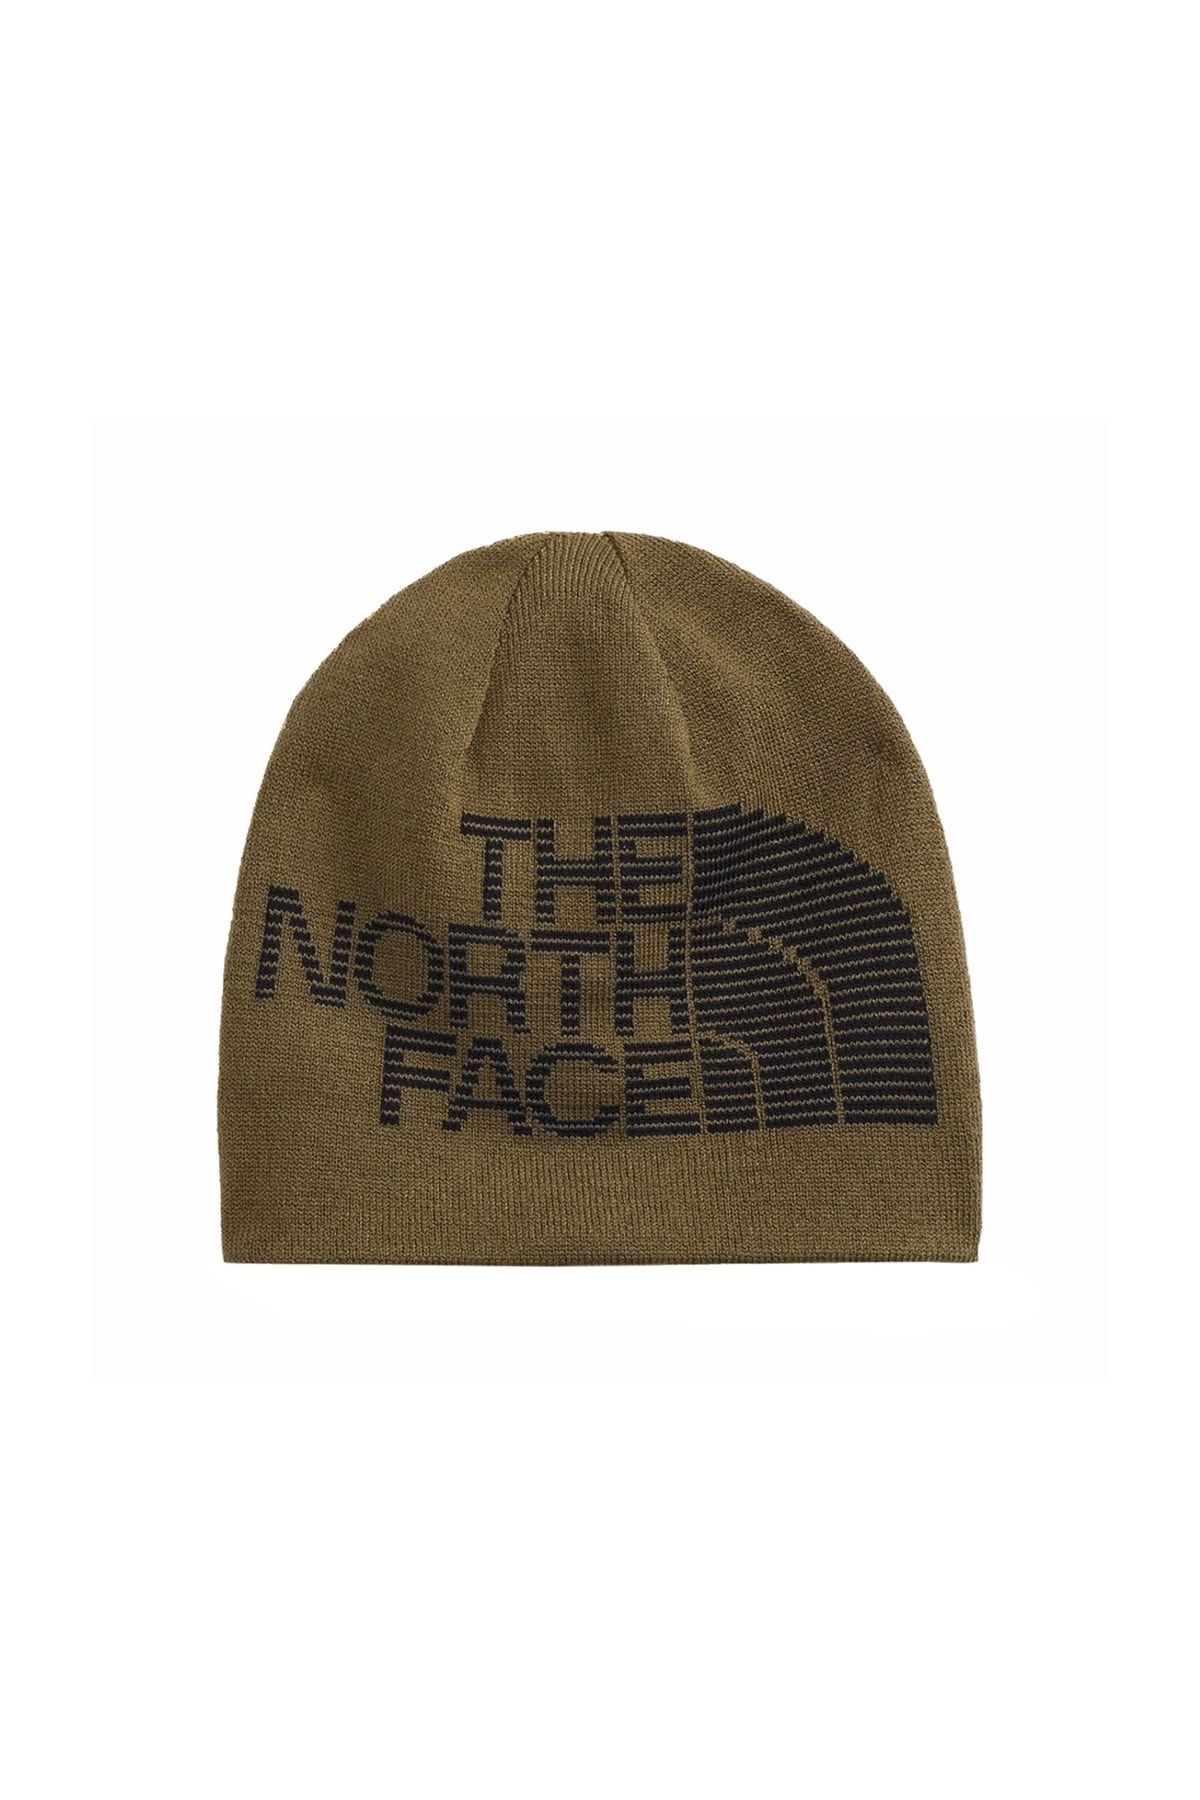 The North Face Reversible Highline Beanie Bere Nf0a7wlawmb1 Haki